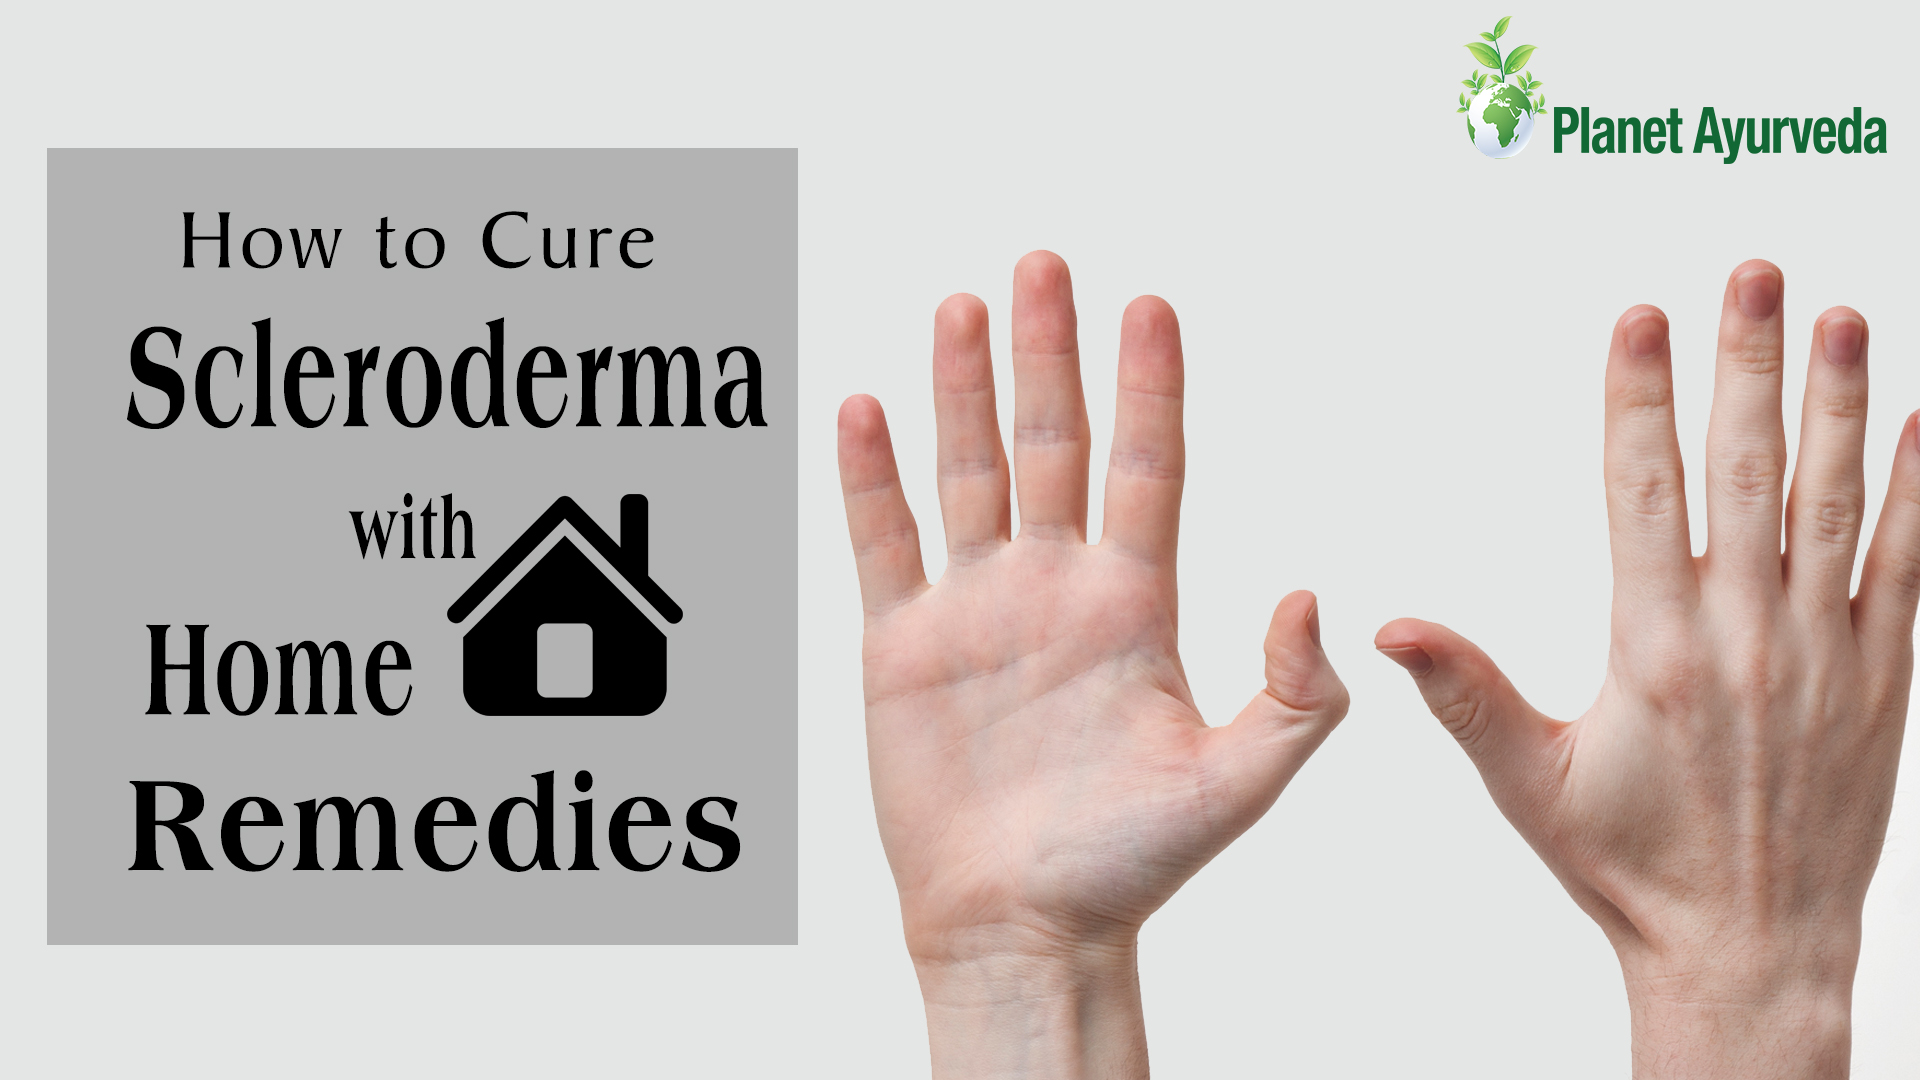 How to Cure Scleroderma with Home Remedies